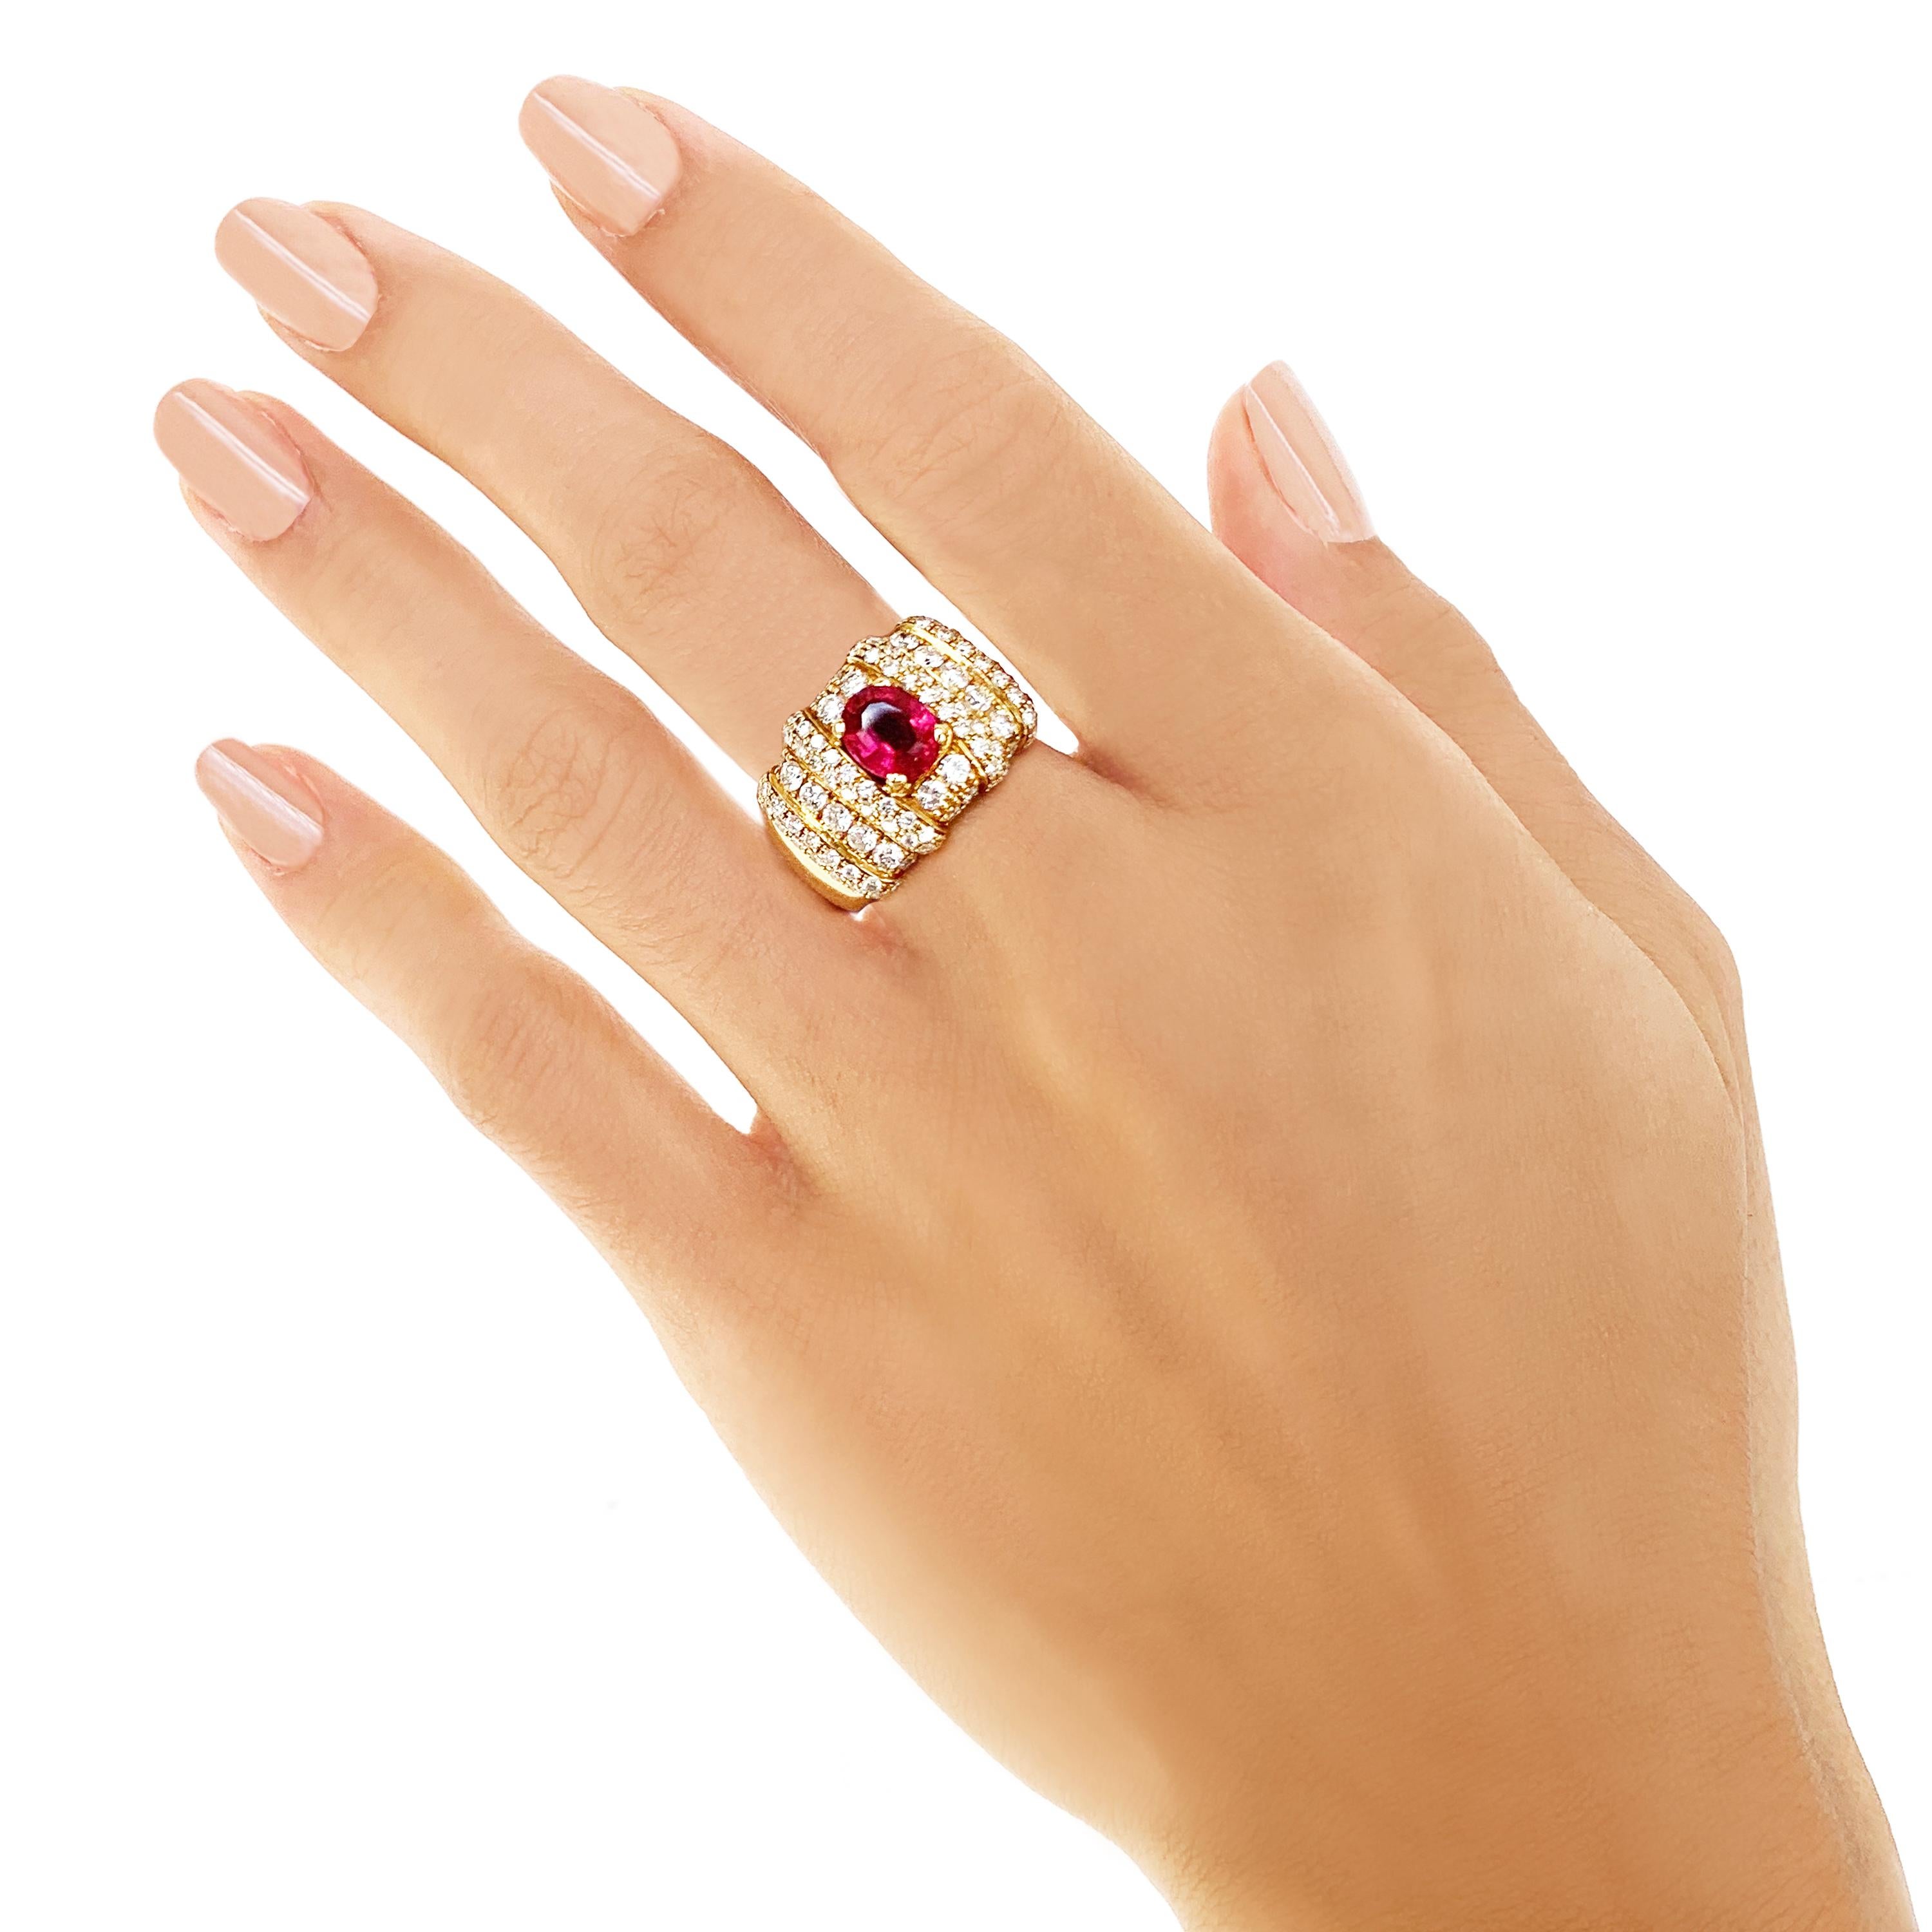 A Rosior by Manuel Rosas 19.2K yellow gold ring set with:
- 1 oval cut red tourmaline (rubilite) with 1,45 ct,
- 96 diamonds with 1,66 ct. 
This unique piece comes with a Certificate of Authenticity. 
Stamps include the Rosior hallmark and 19.2K